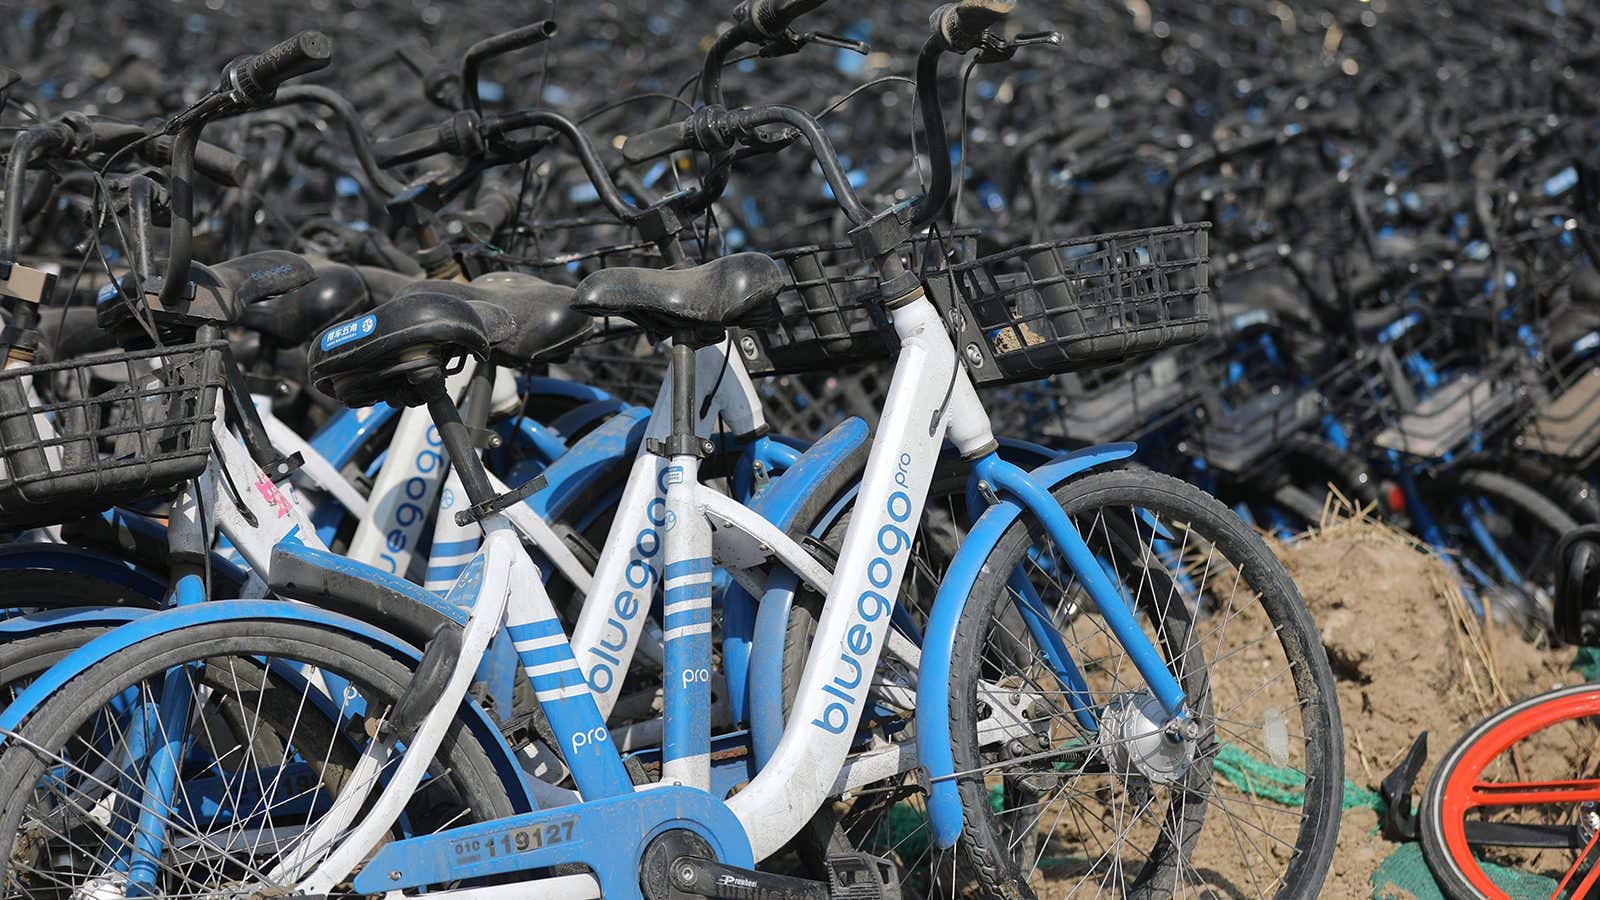 Transportation is the fastest-growing source of emissions, and a green transportation startups like bike sharing operations are attracting investment to match.